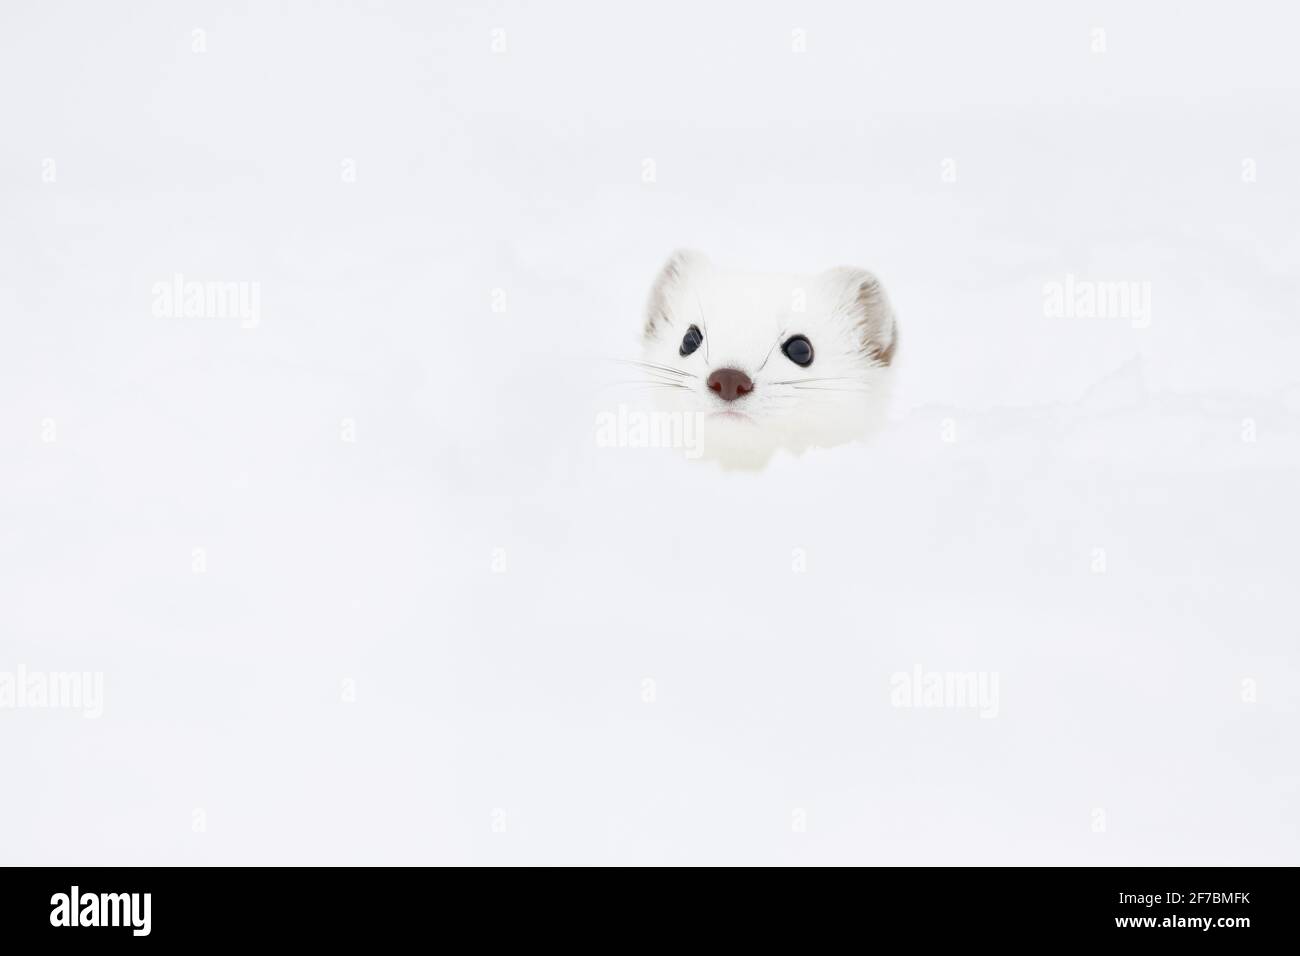 Ermine, Stoat, Short-tailed weasel (Mustela erminea), portrait with winter fur in snow, Switzerland Stock Photo